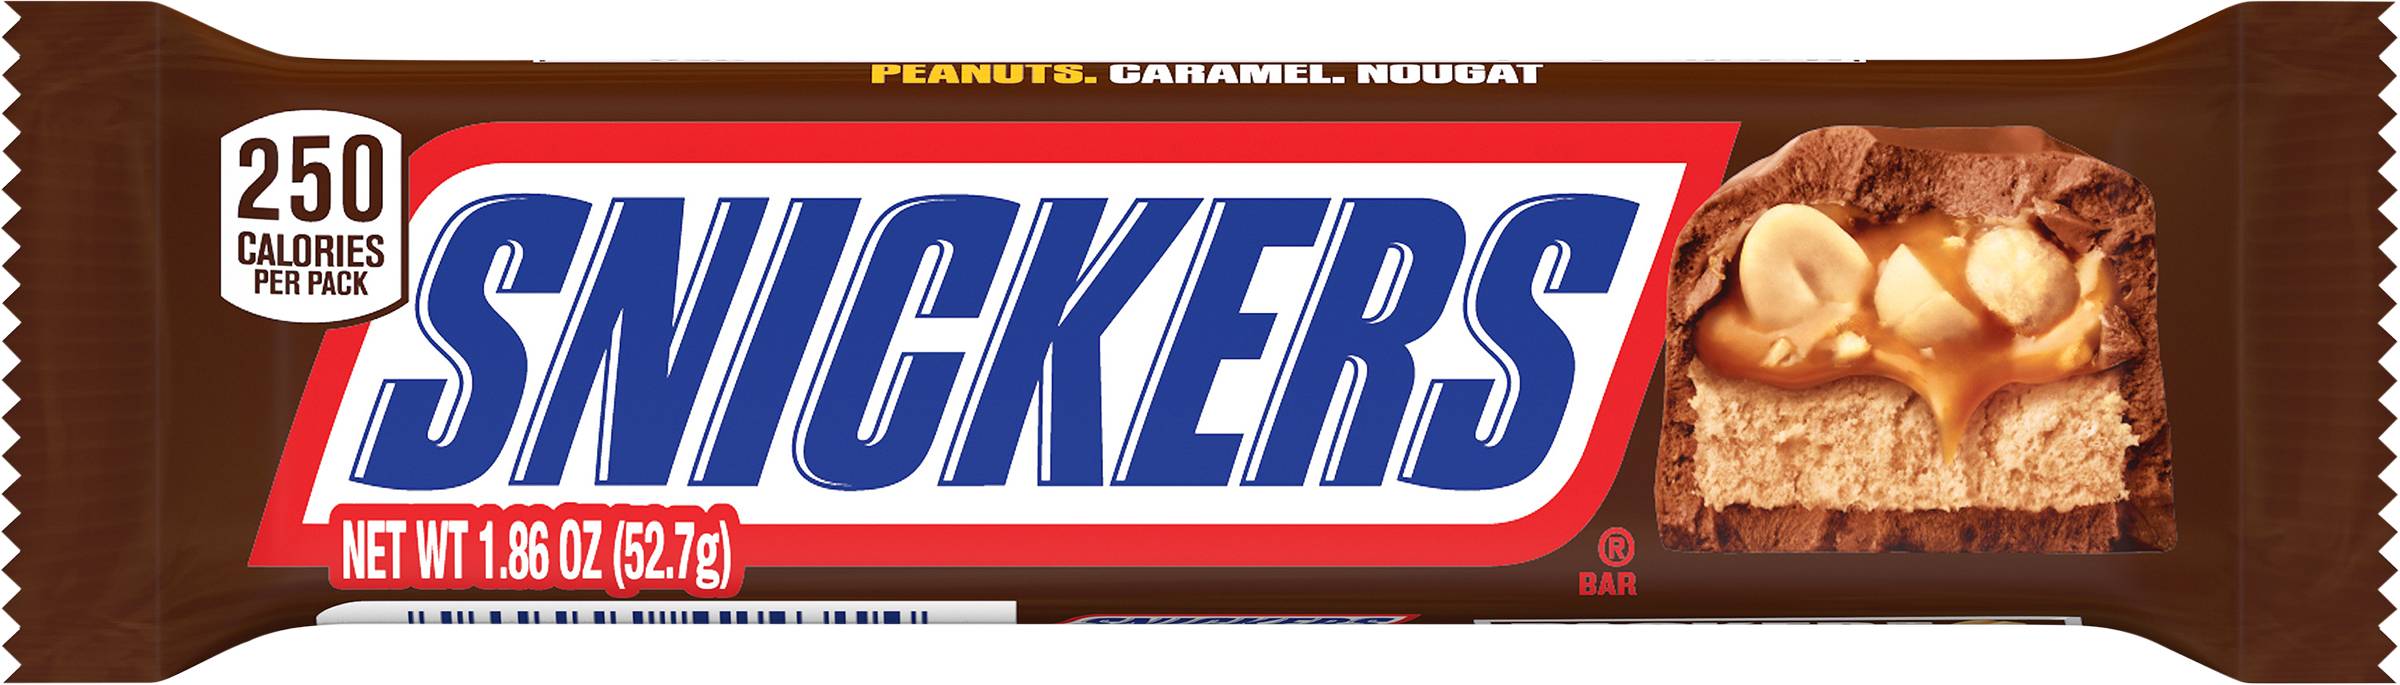 Snickers Peanuts Caramel Candy Bar (milk chocolate)